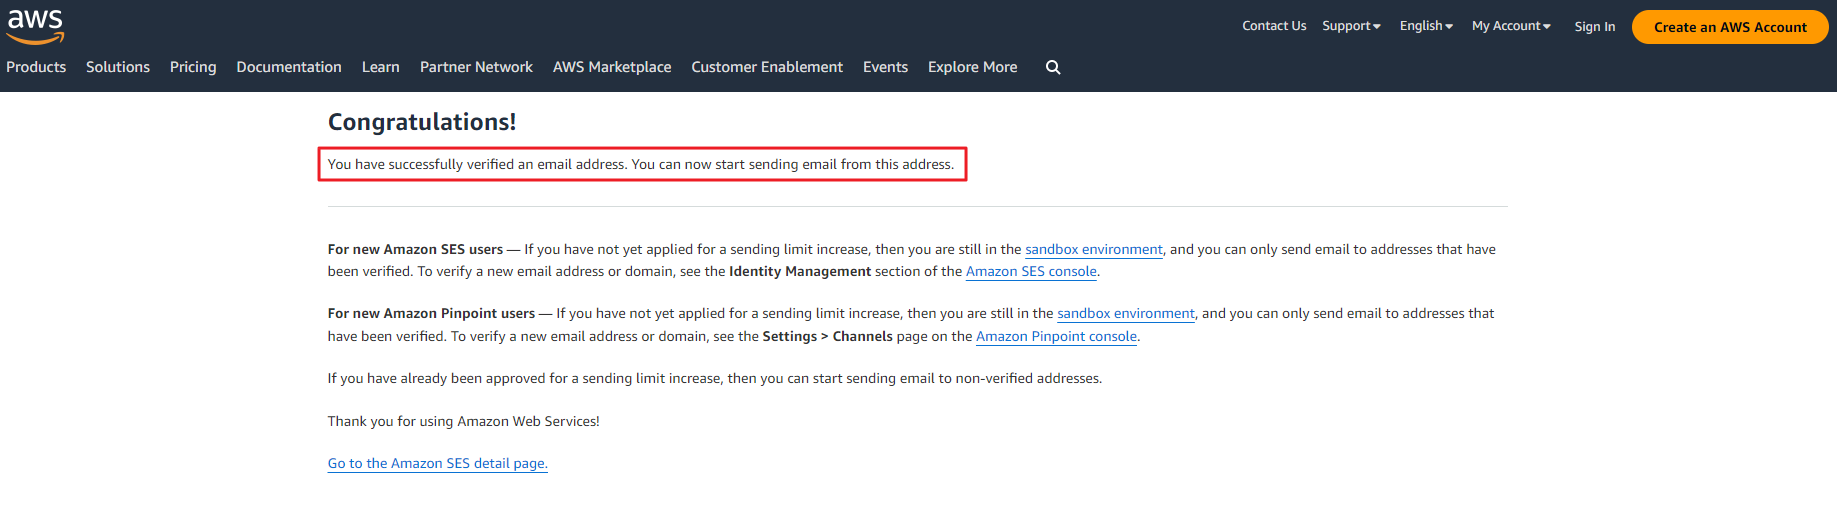 Sender email address has been verified successfully by AWS